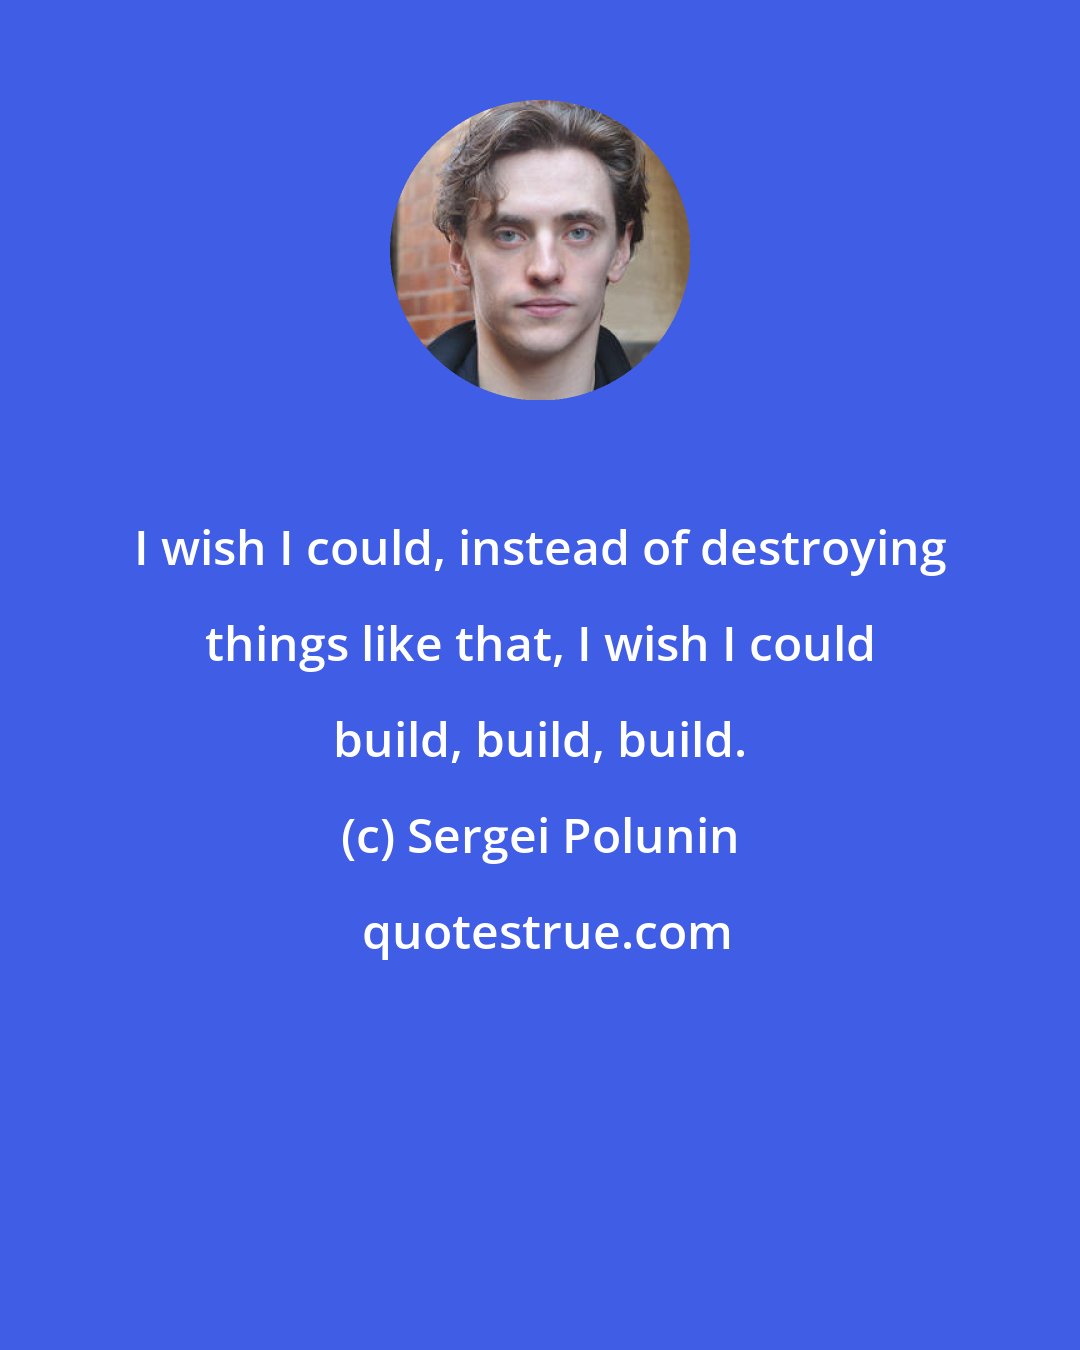 Sergei Polunin: I wish I could, instead of destroying things like that, I wish I could build, build, build.